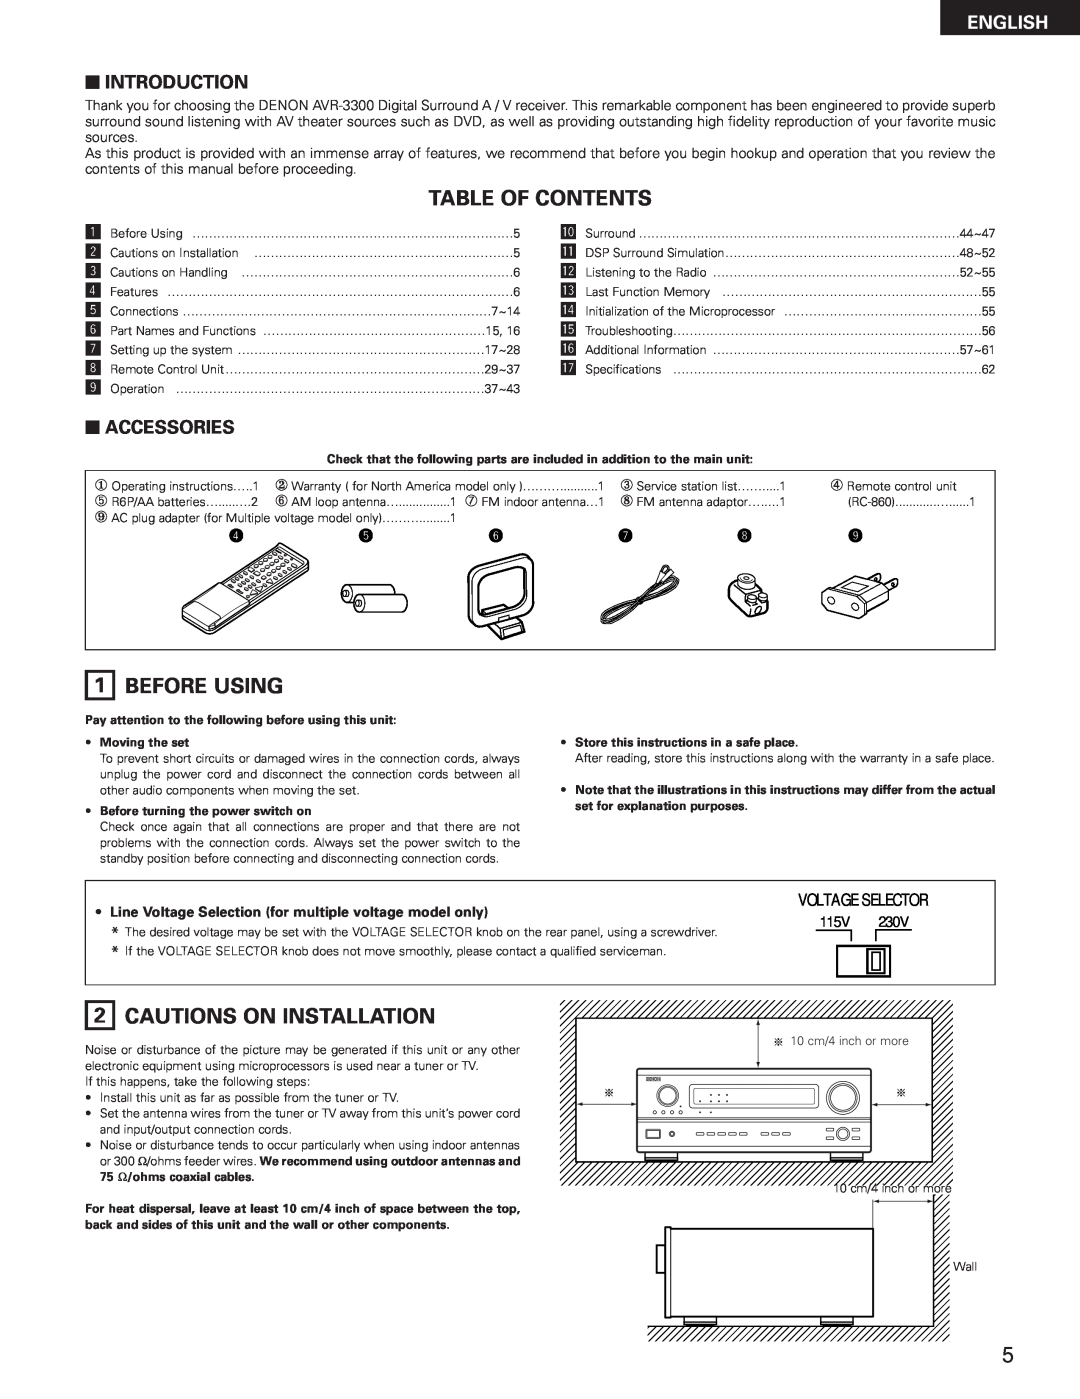 Denon AVR-3300 manual Table Of Contents, Before Using, Cautions On Installation, English, 2INTRODUCTION, 2ACCESSORIES 